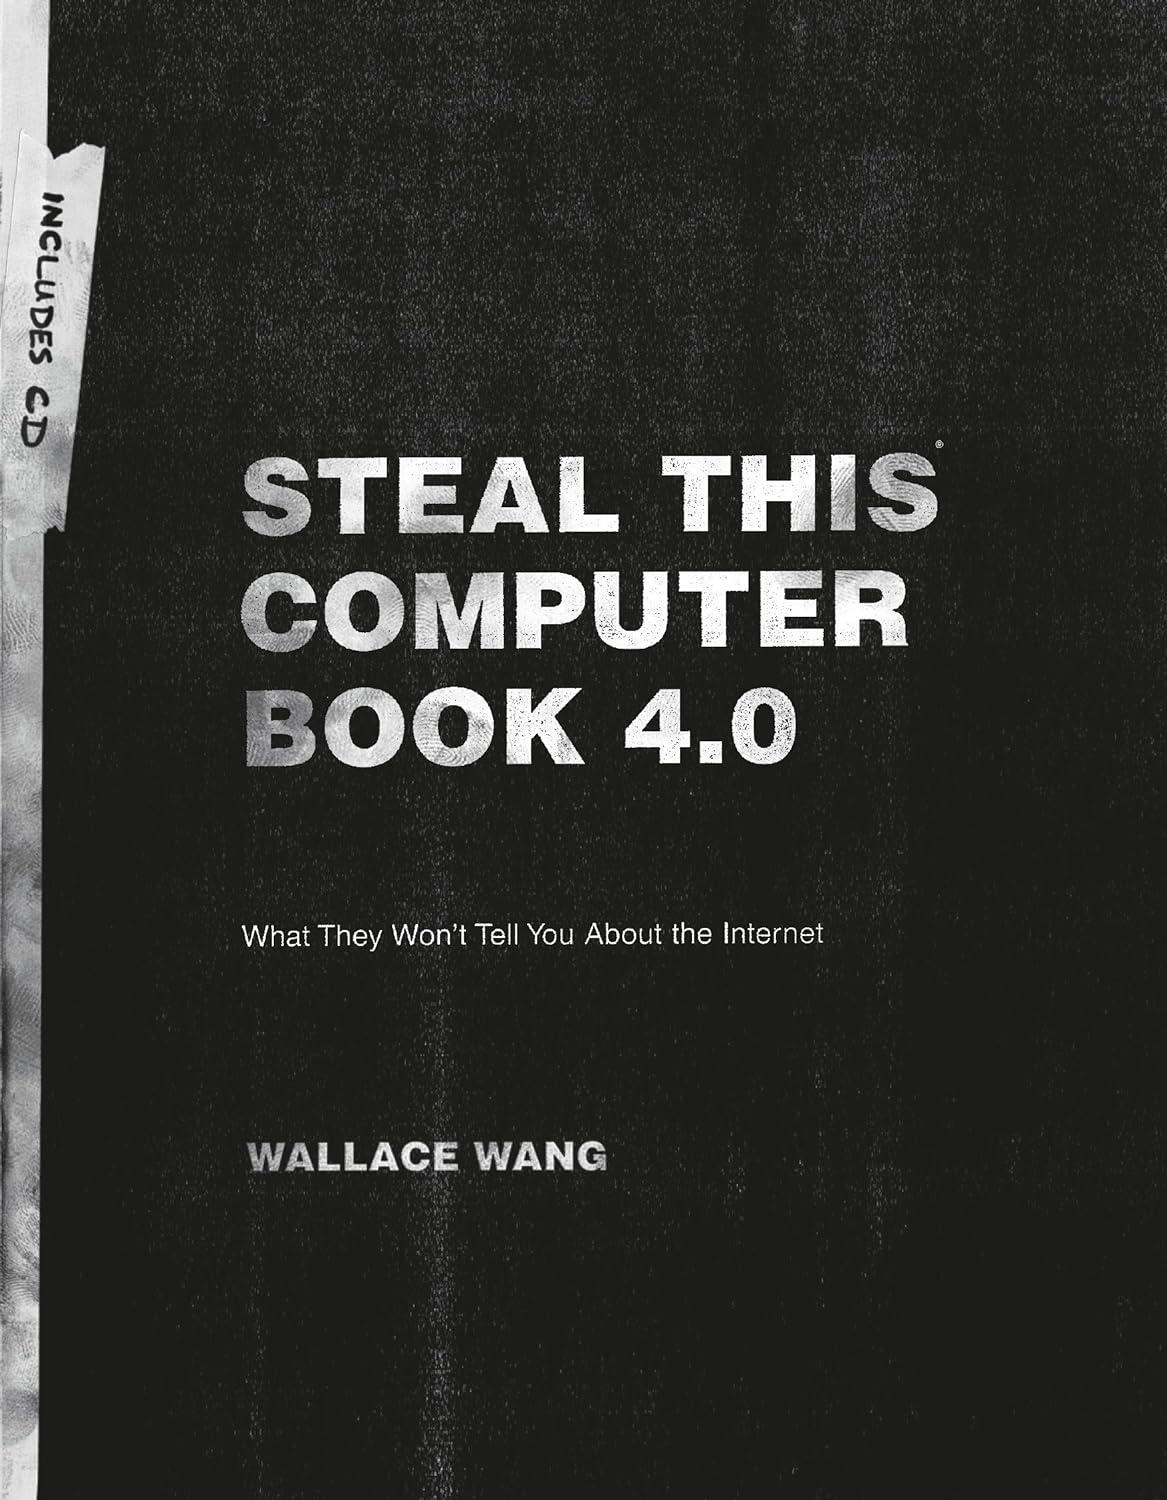 steal this computer book 4.0 what they won't tell you about the internet 4th edition wallace wang 1593271050,